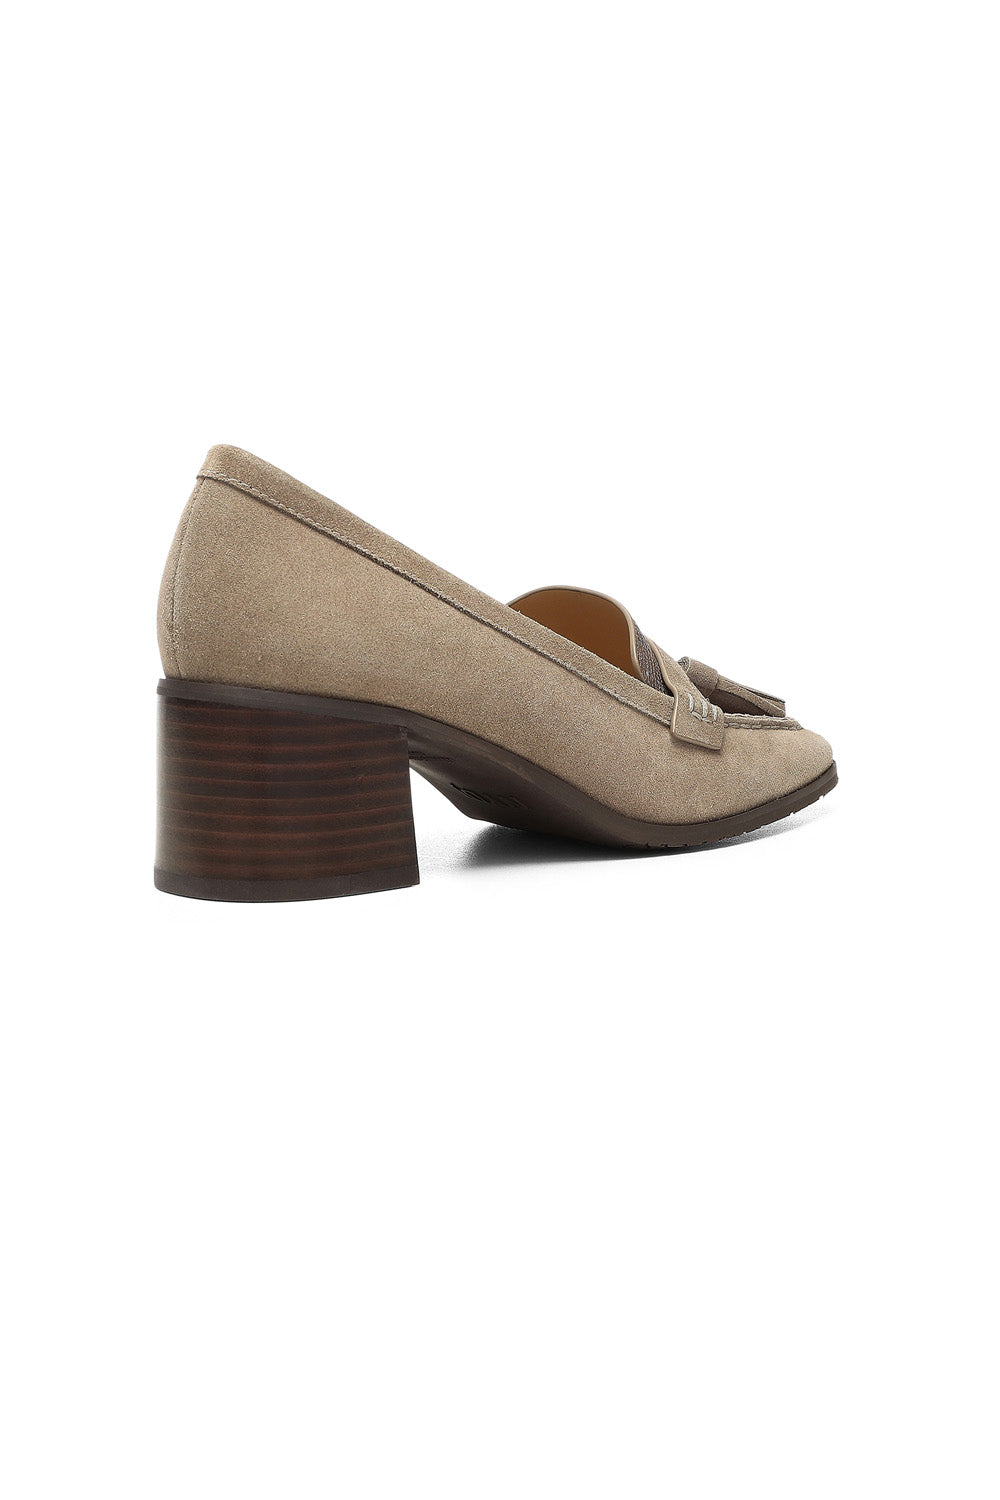 NYDJ Dexter Loafers In Suede - Taupe